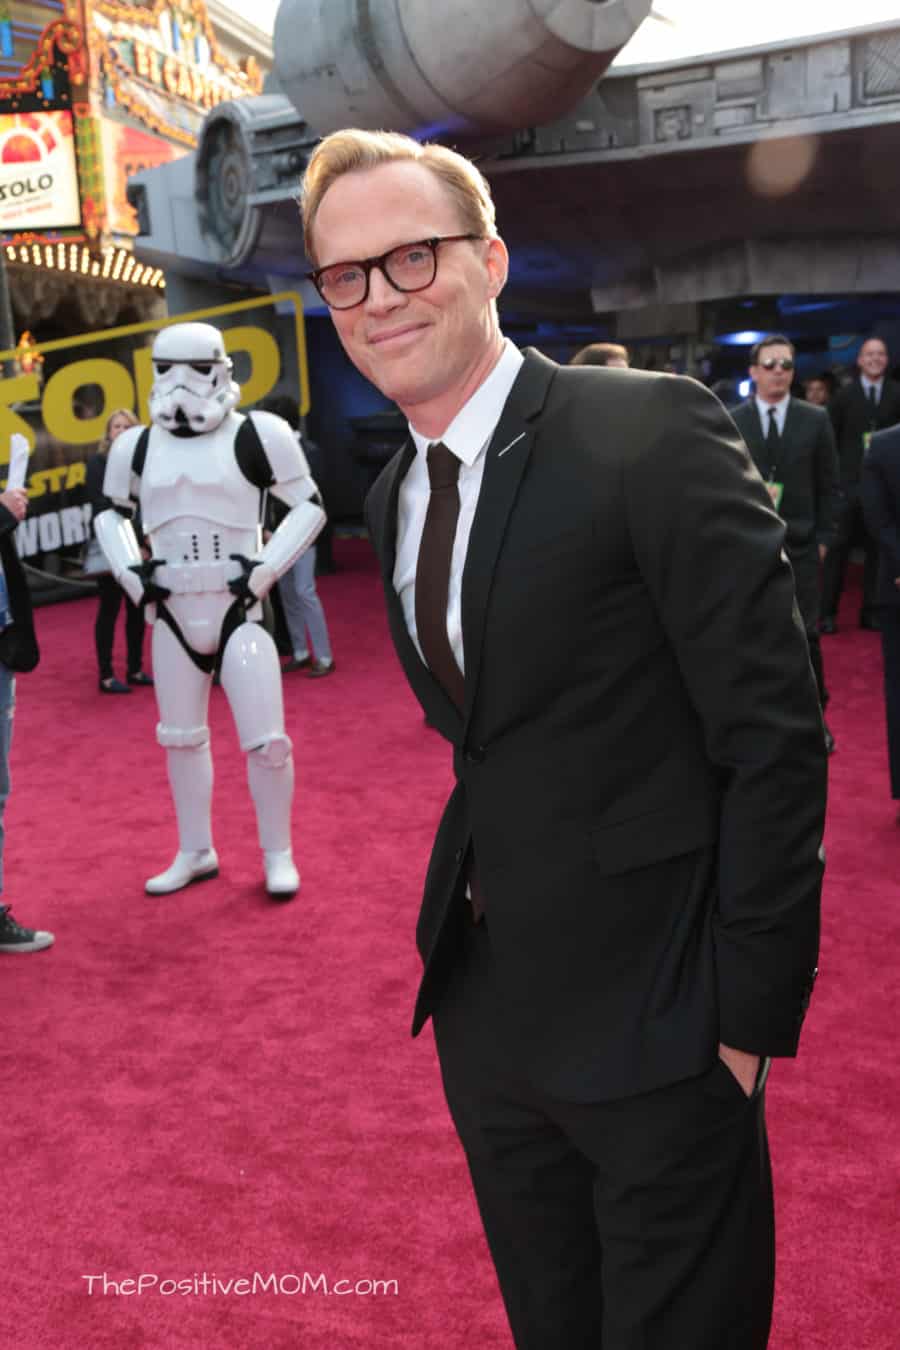 Paul Bettany attends the world premiere of ÒSolo: A Star Wars Story in Hollywood on May 10, 2018..(Photo: Alex J. Berliner/ABImages).